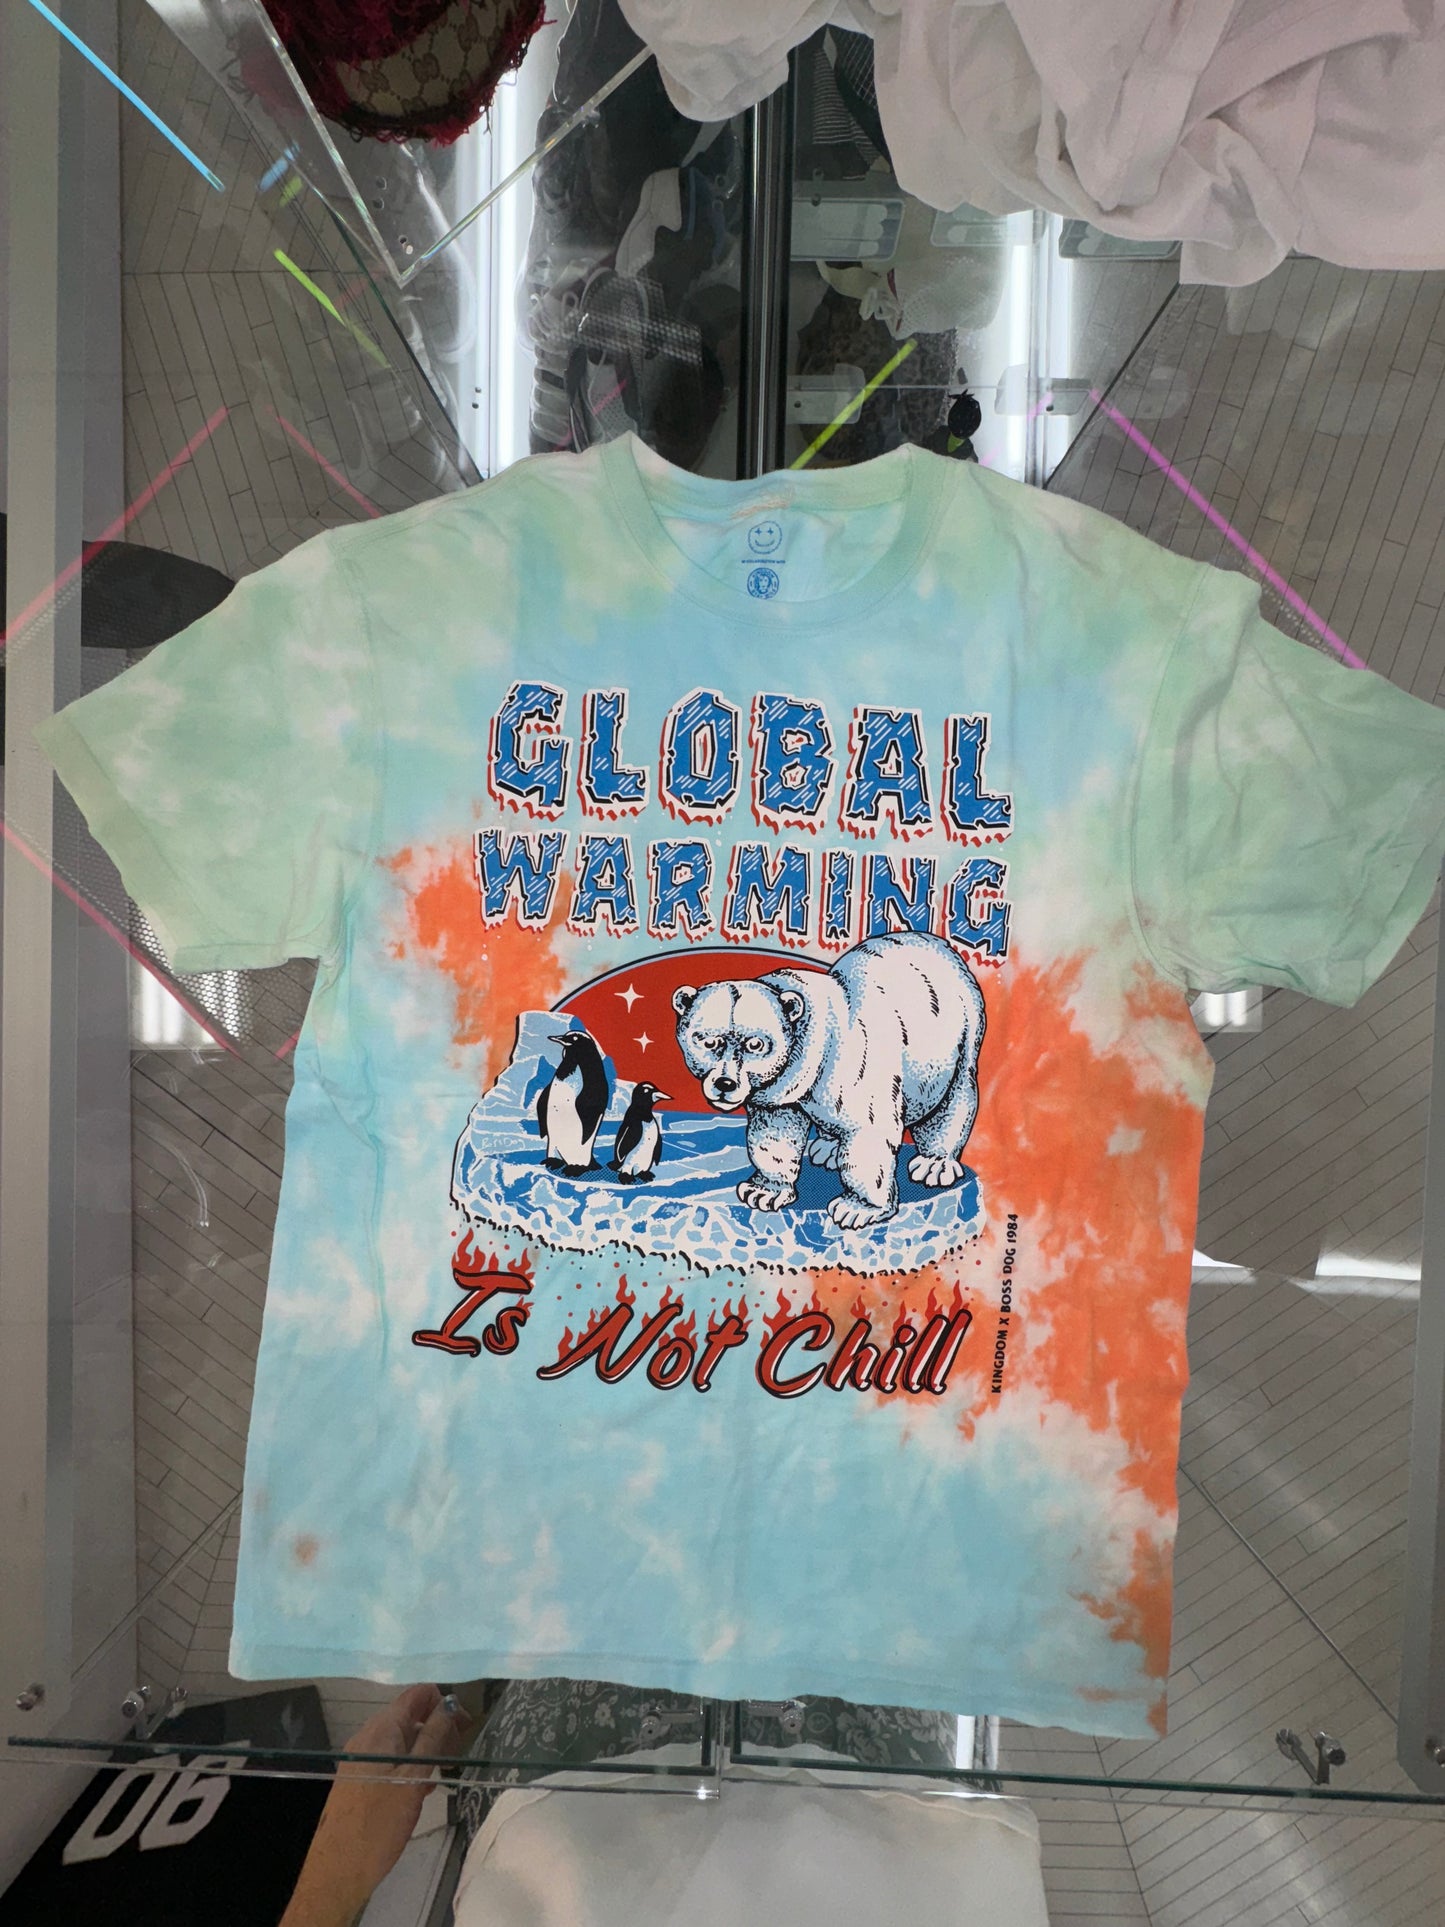 Global Warming “its not chill” tee by Kingdom